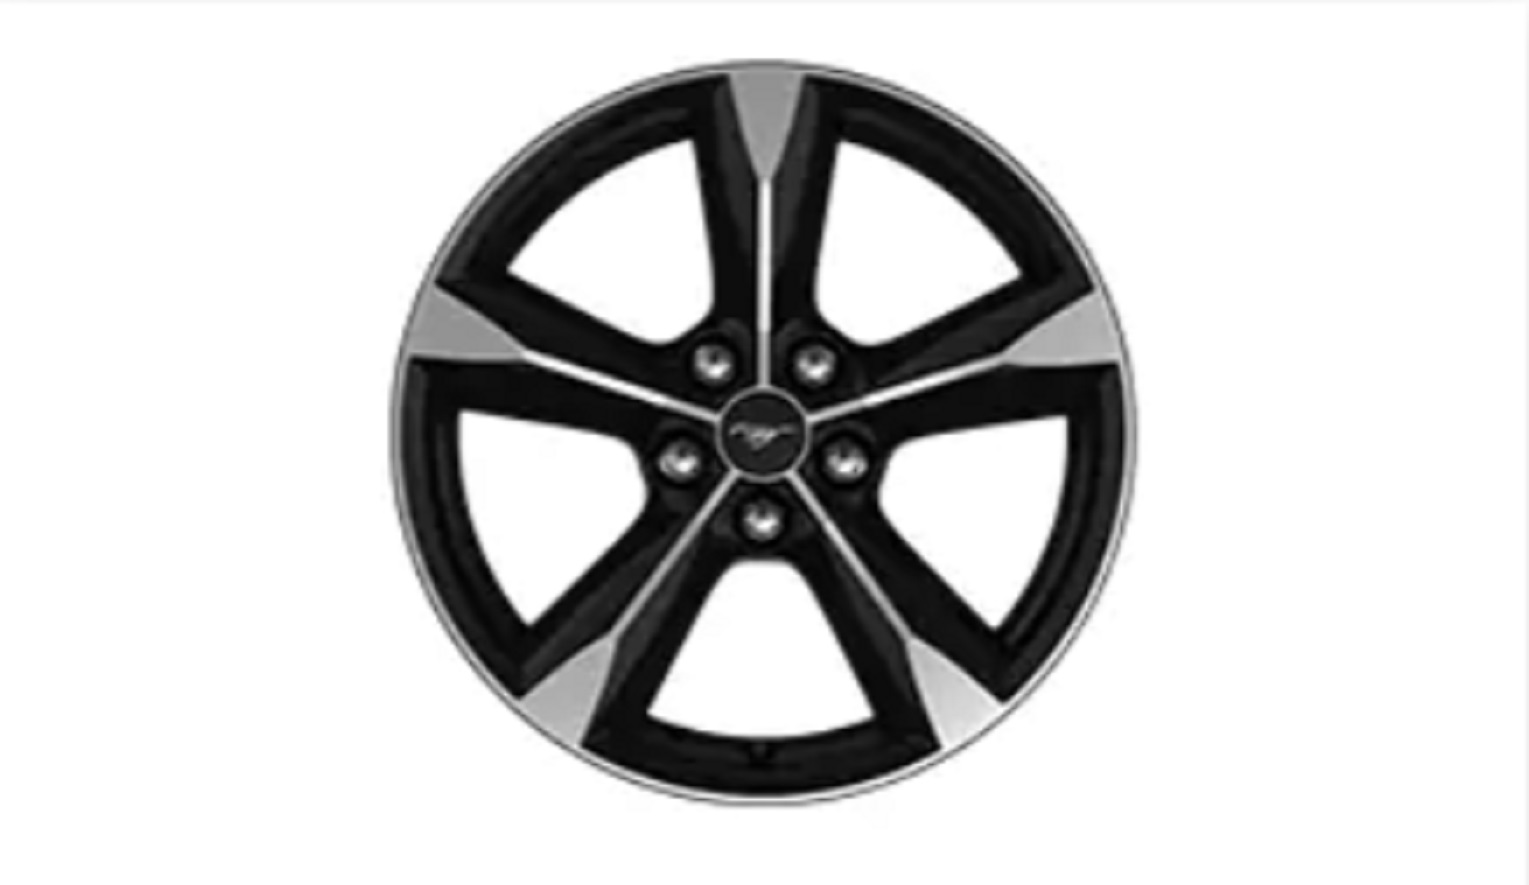 18" Machined-Face Aluminum with Low-Gloss Ebony Black-Painted Pockets Wheels